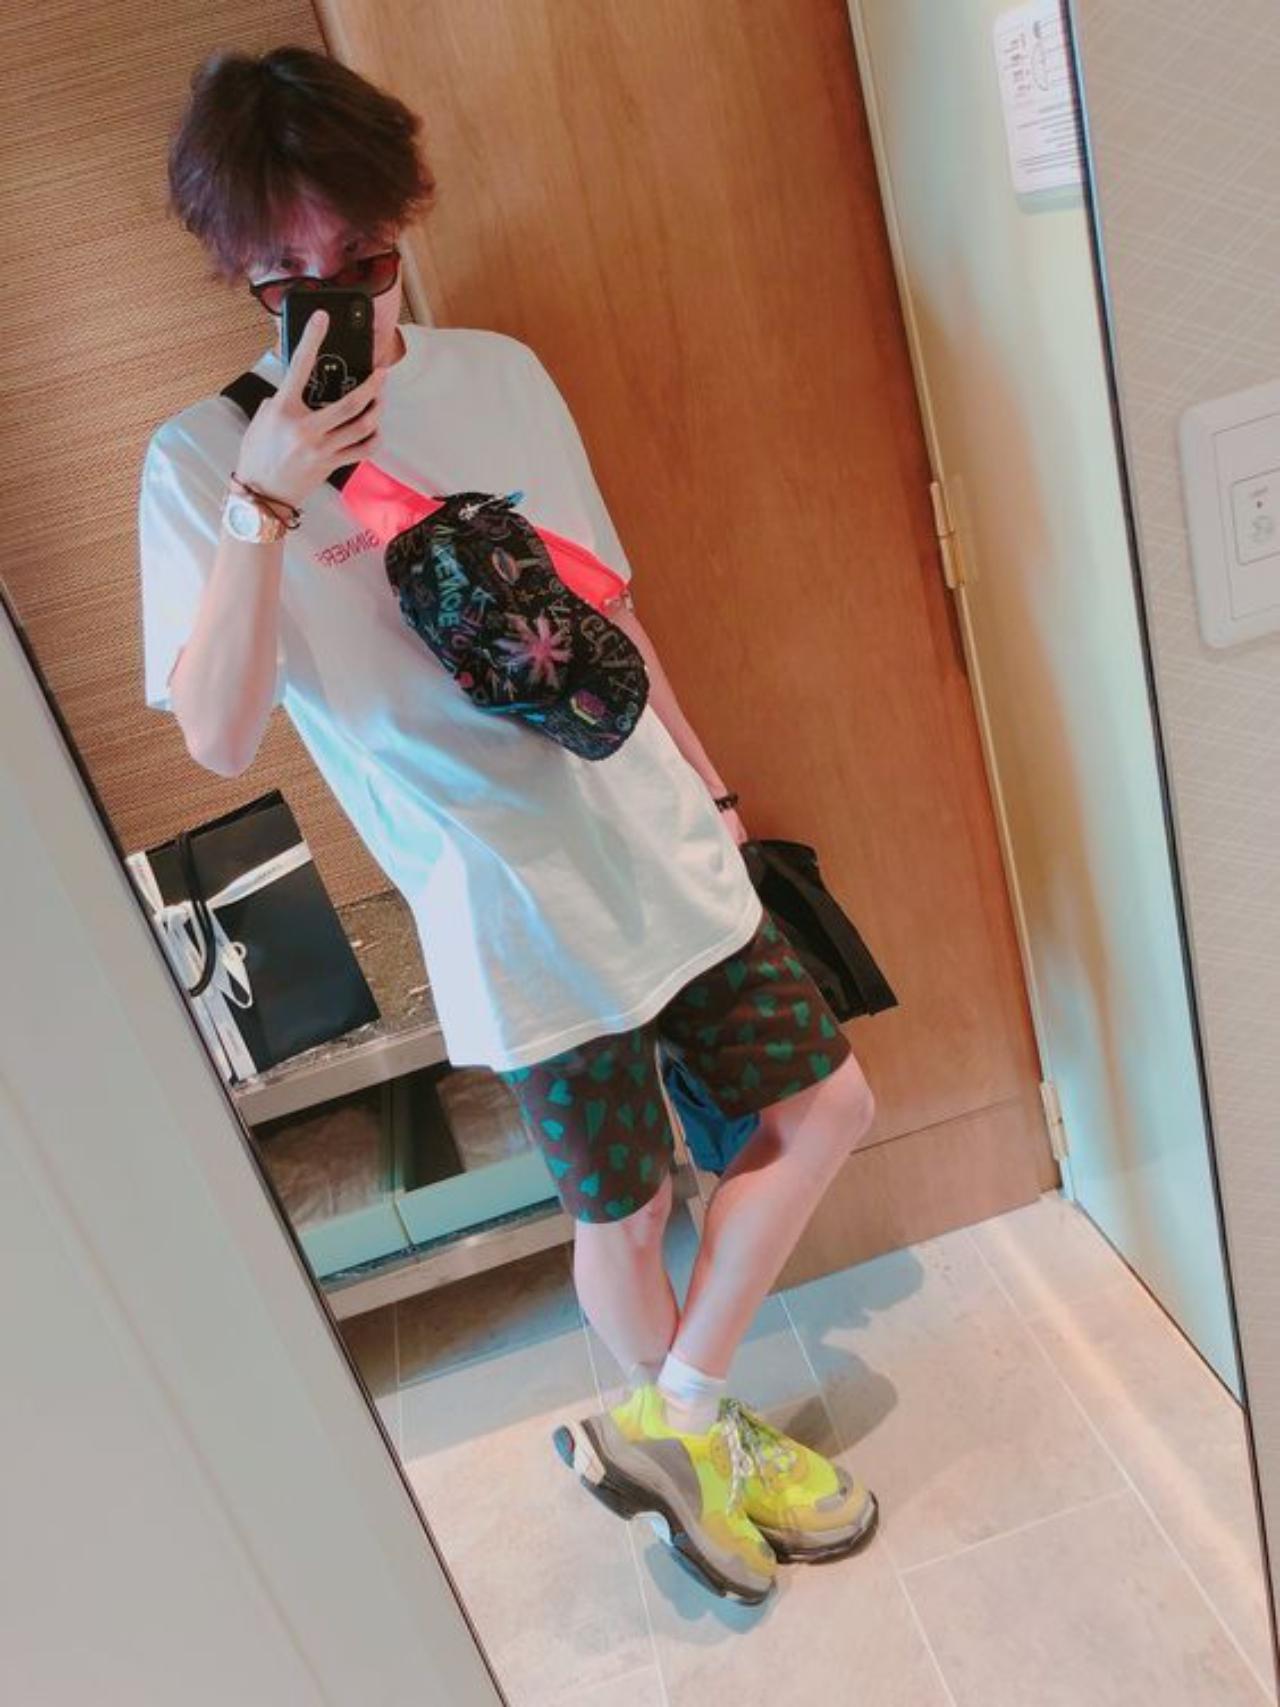 J-Hope seems all set to flaunt his shoes on an early morning walk. J-Hope's bags and sling purses are another way in which he sets in fashion game apart. And he's doubling the strap of the bag as a cap holder!